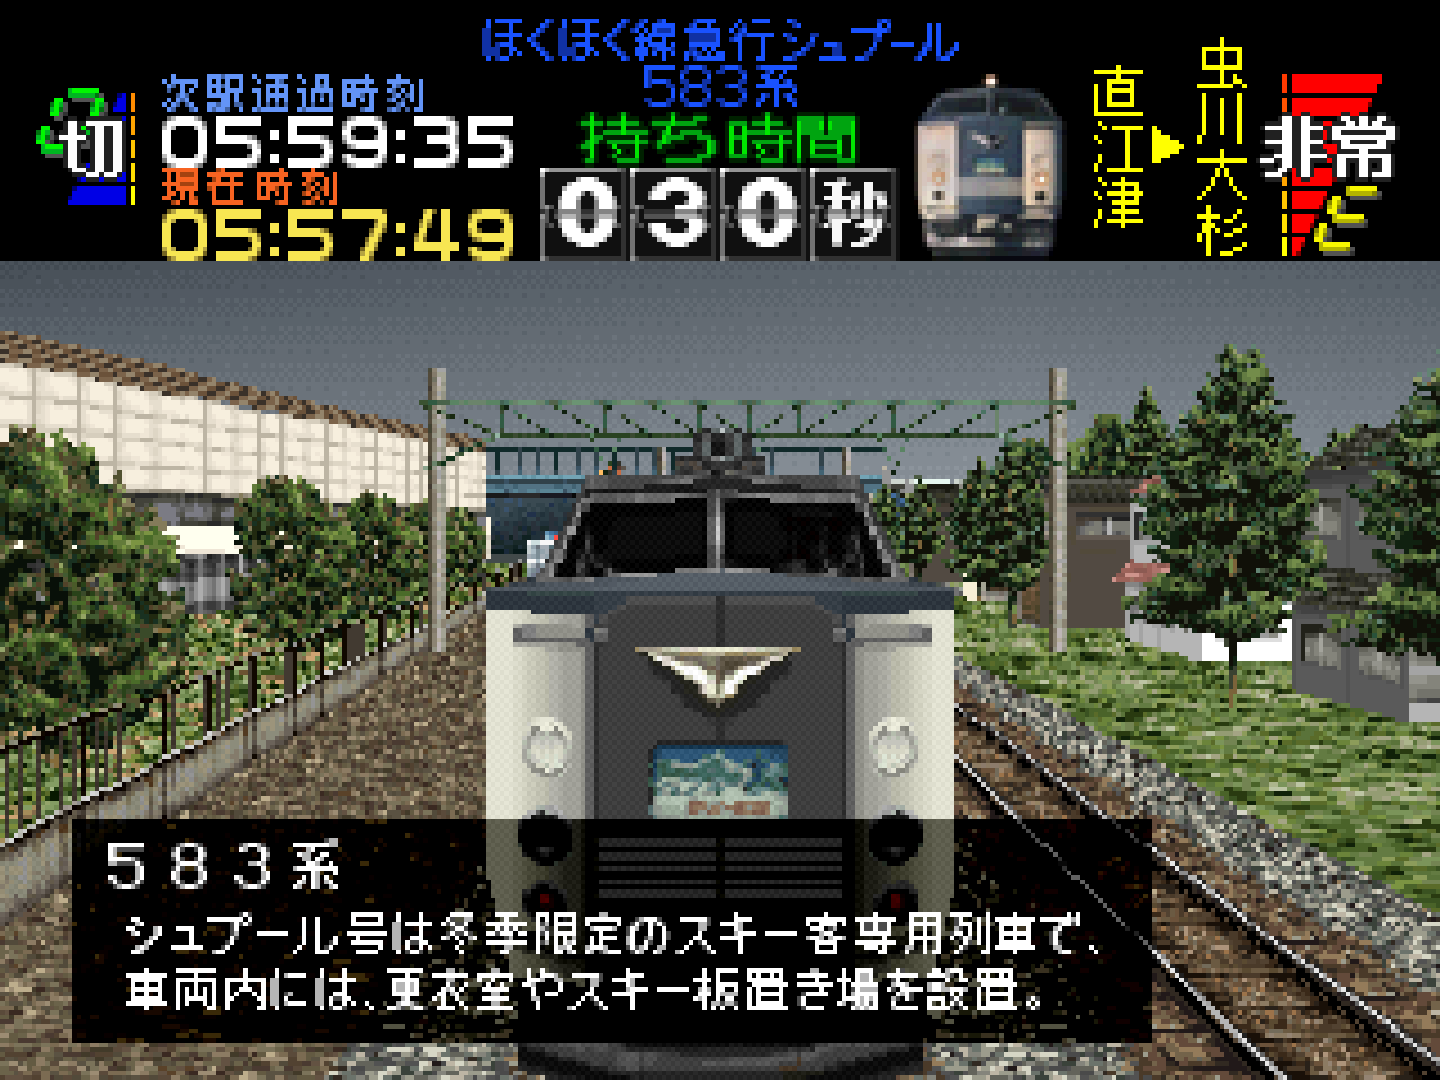 Let's Go by Train Pro_01-230828-080916.png